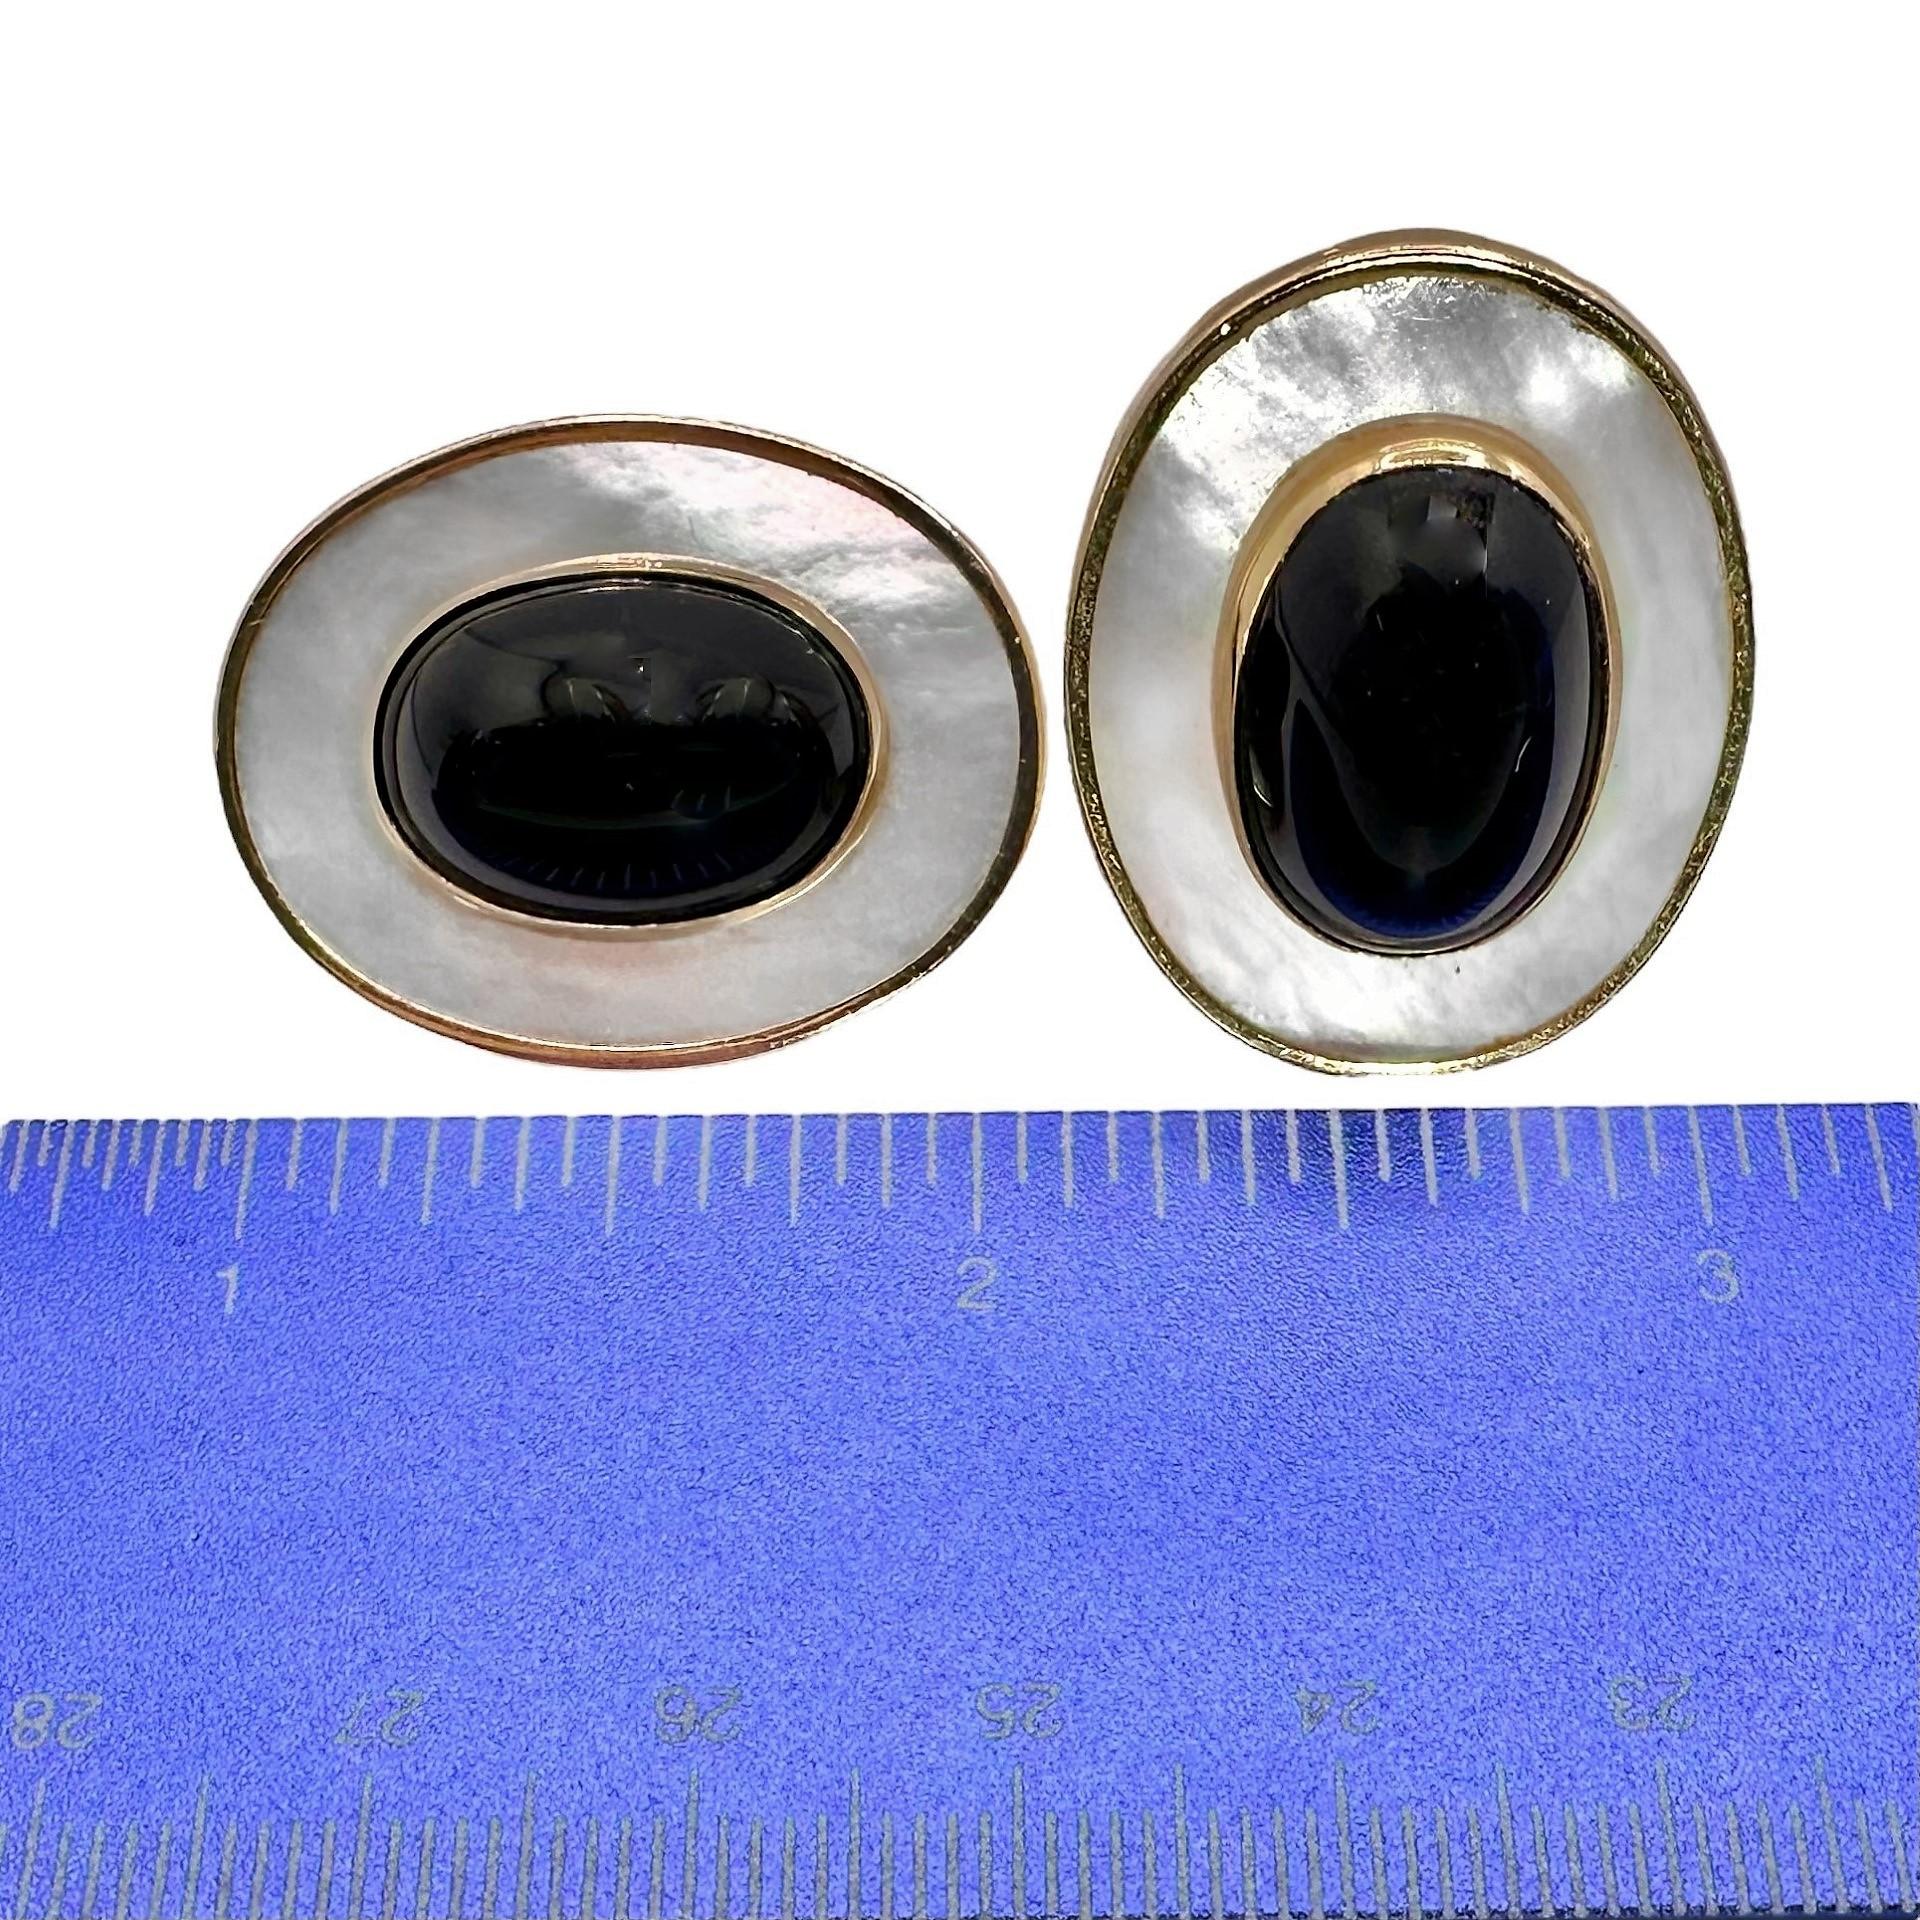 Oval Cut Gold, Mother of Pearl, and Onyx, Oval Shaped Earrings by Peter Brams Designs For Sale